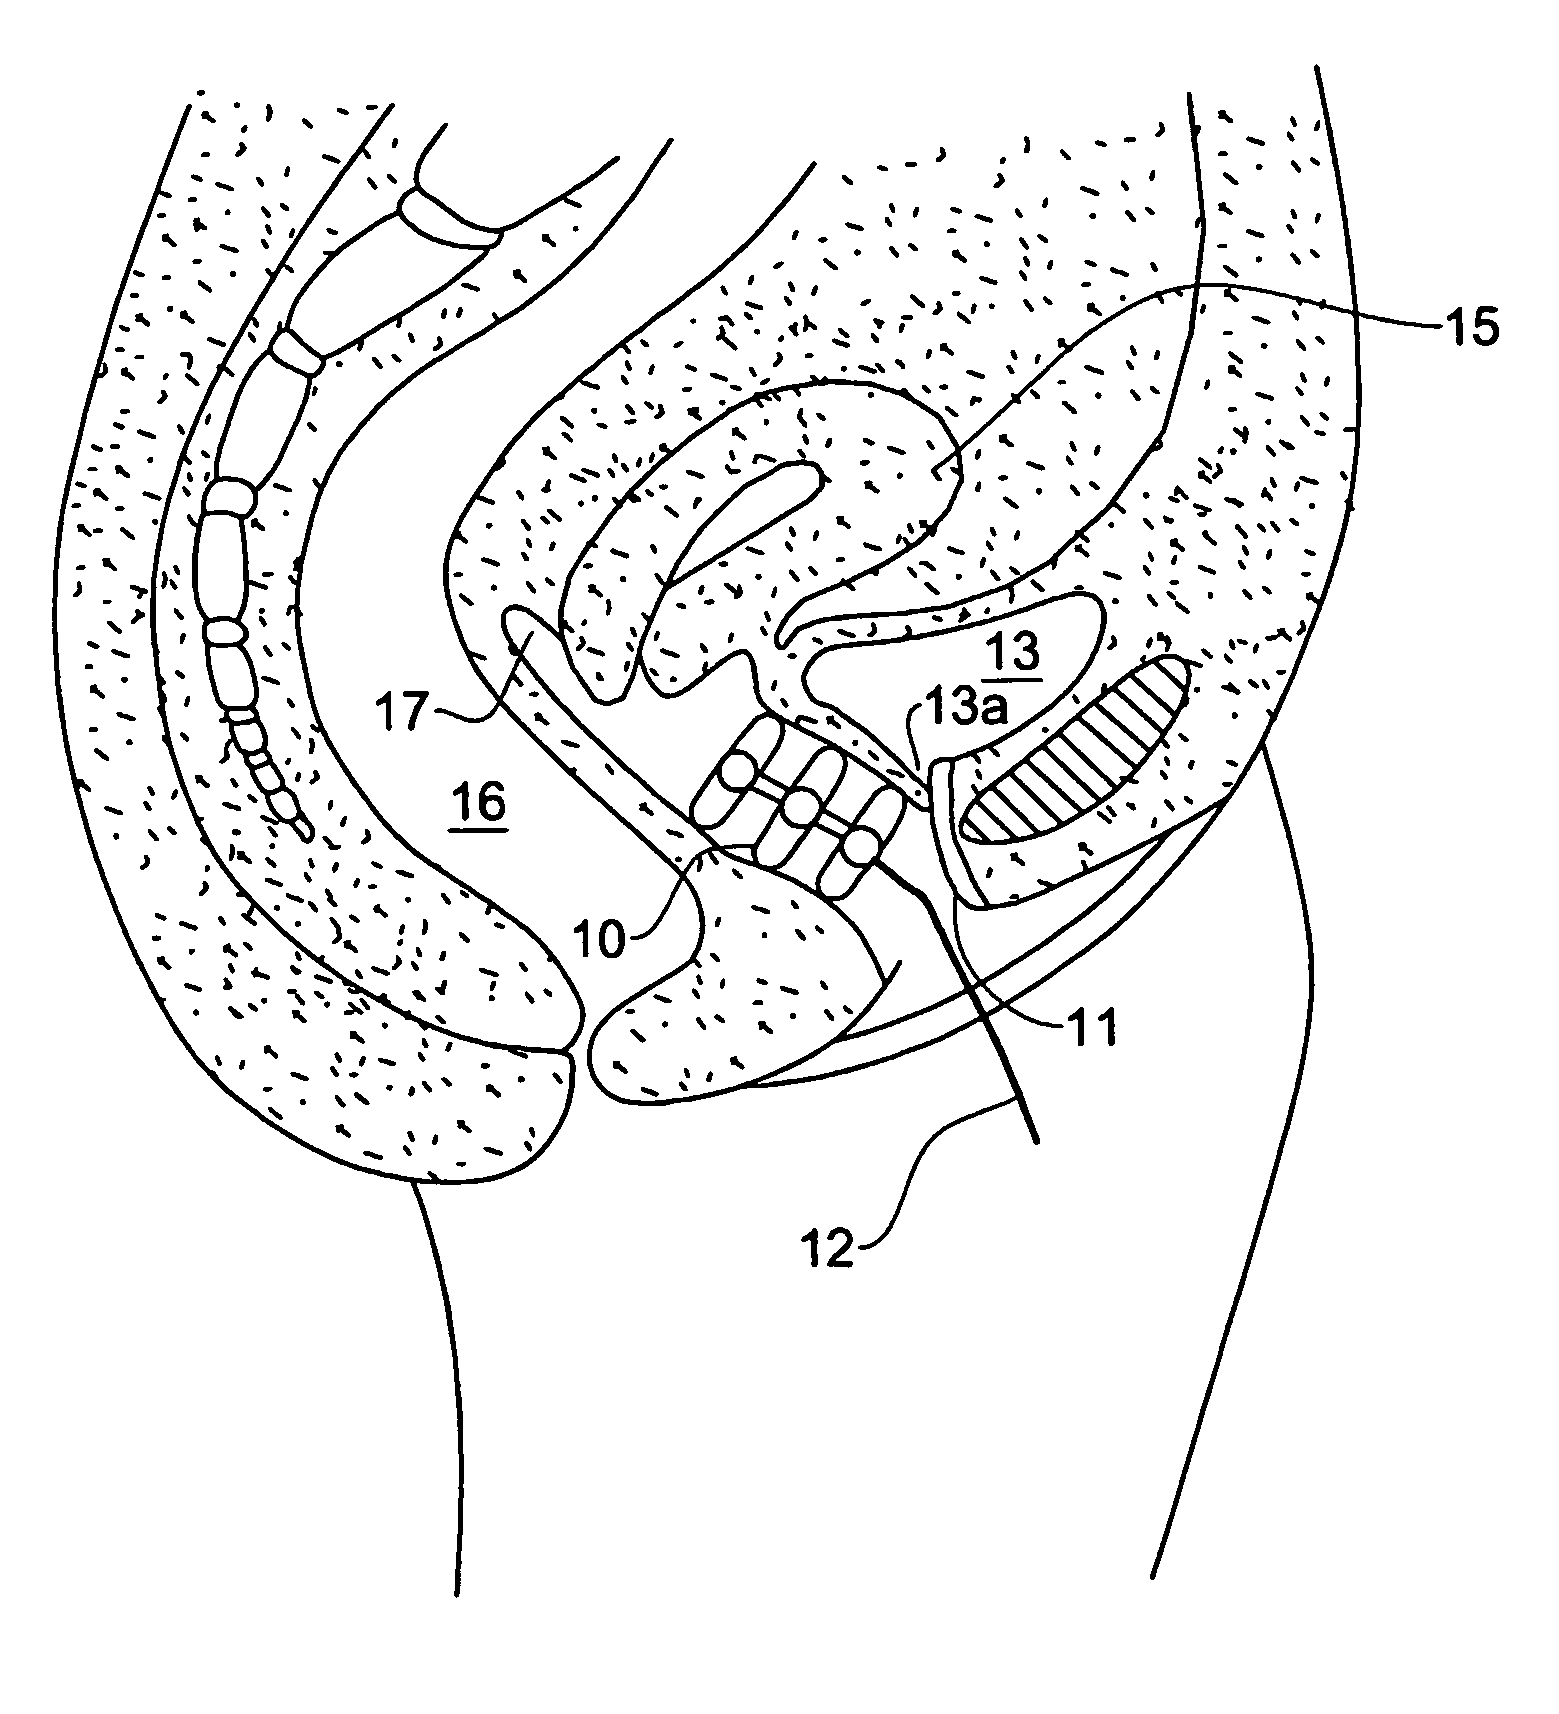 Device for the prevention of urinary incontinence in females